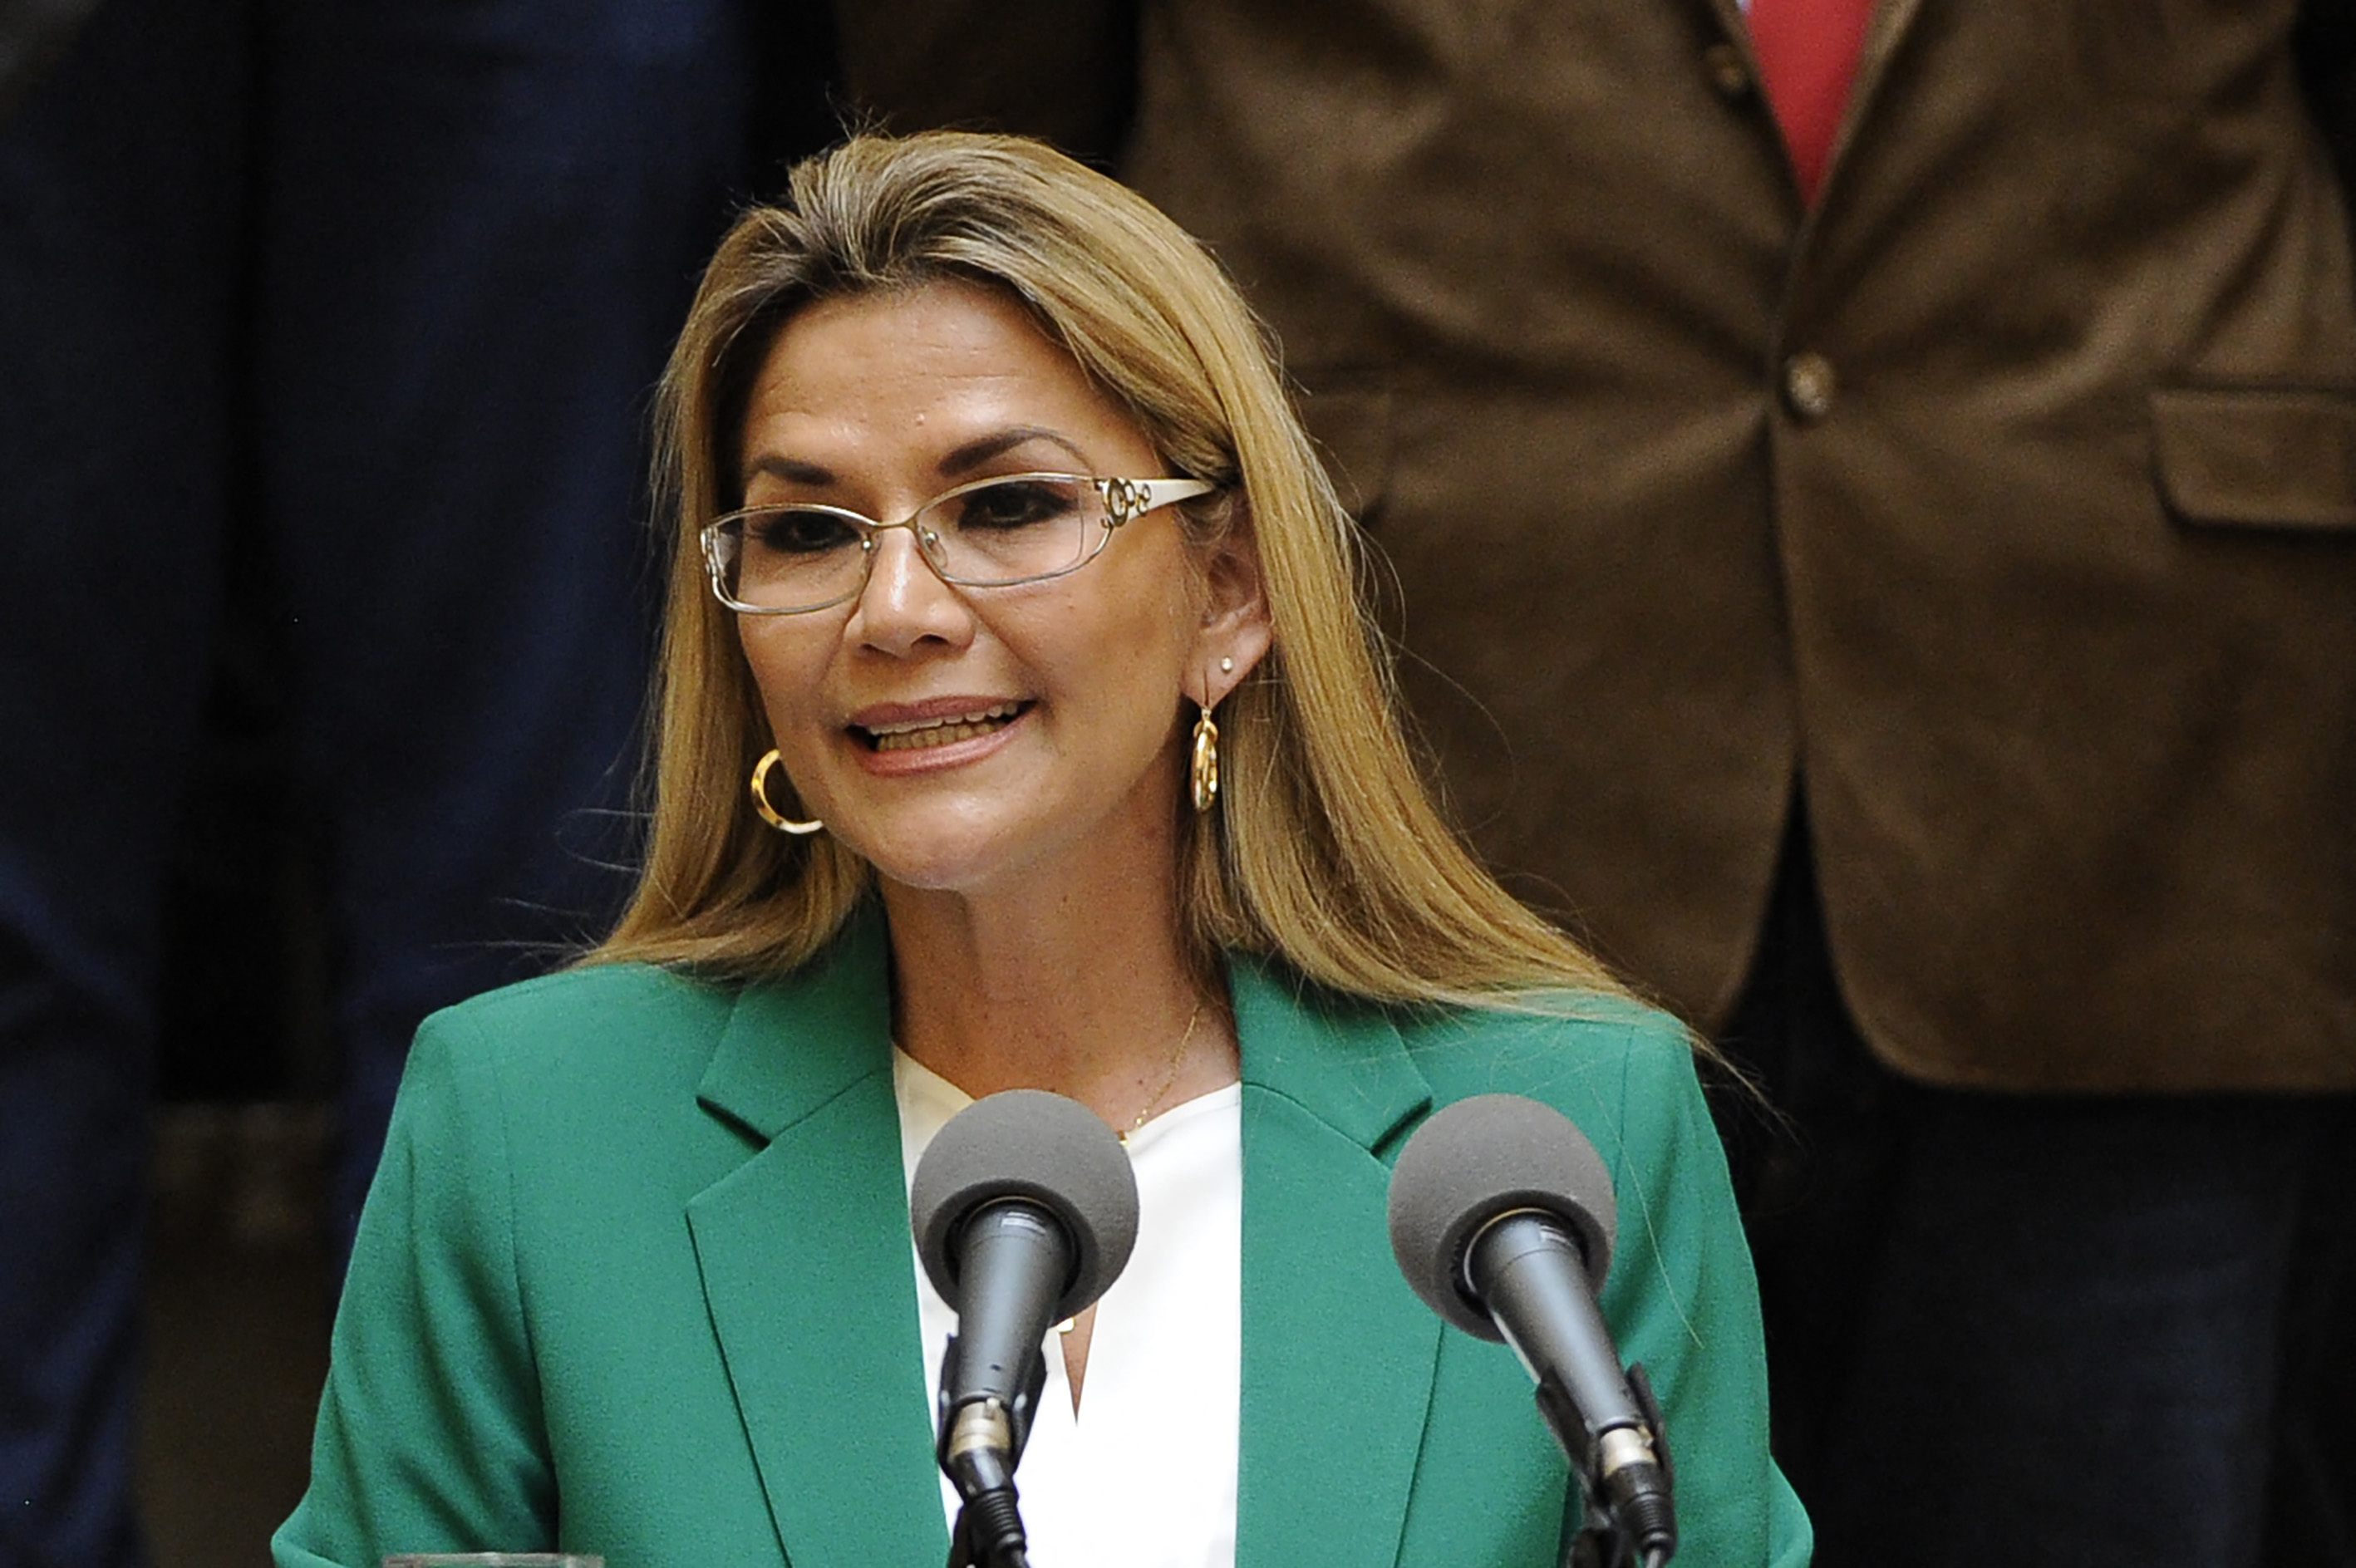 In this January 22, 2020 file photo, Bolivia's interim President, Jeanine ez, gives a speech during the celebration of the Day of the Plurinational State at Quemado Palace in La Paz.  Former Bolivian President Jeanine Aez was sentenced to 10 years in prison on June 10, 222 for an alleged plot to overthrow her rival and predecessor Evo Morales.